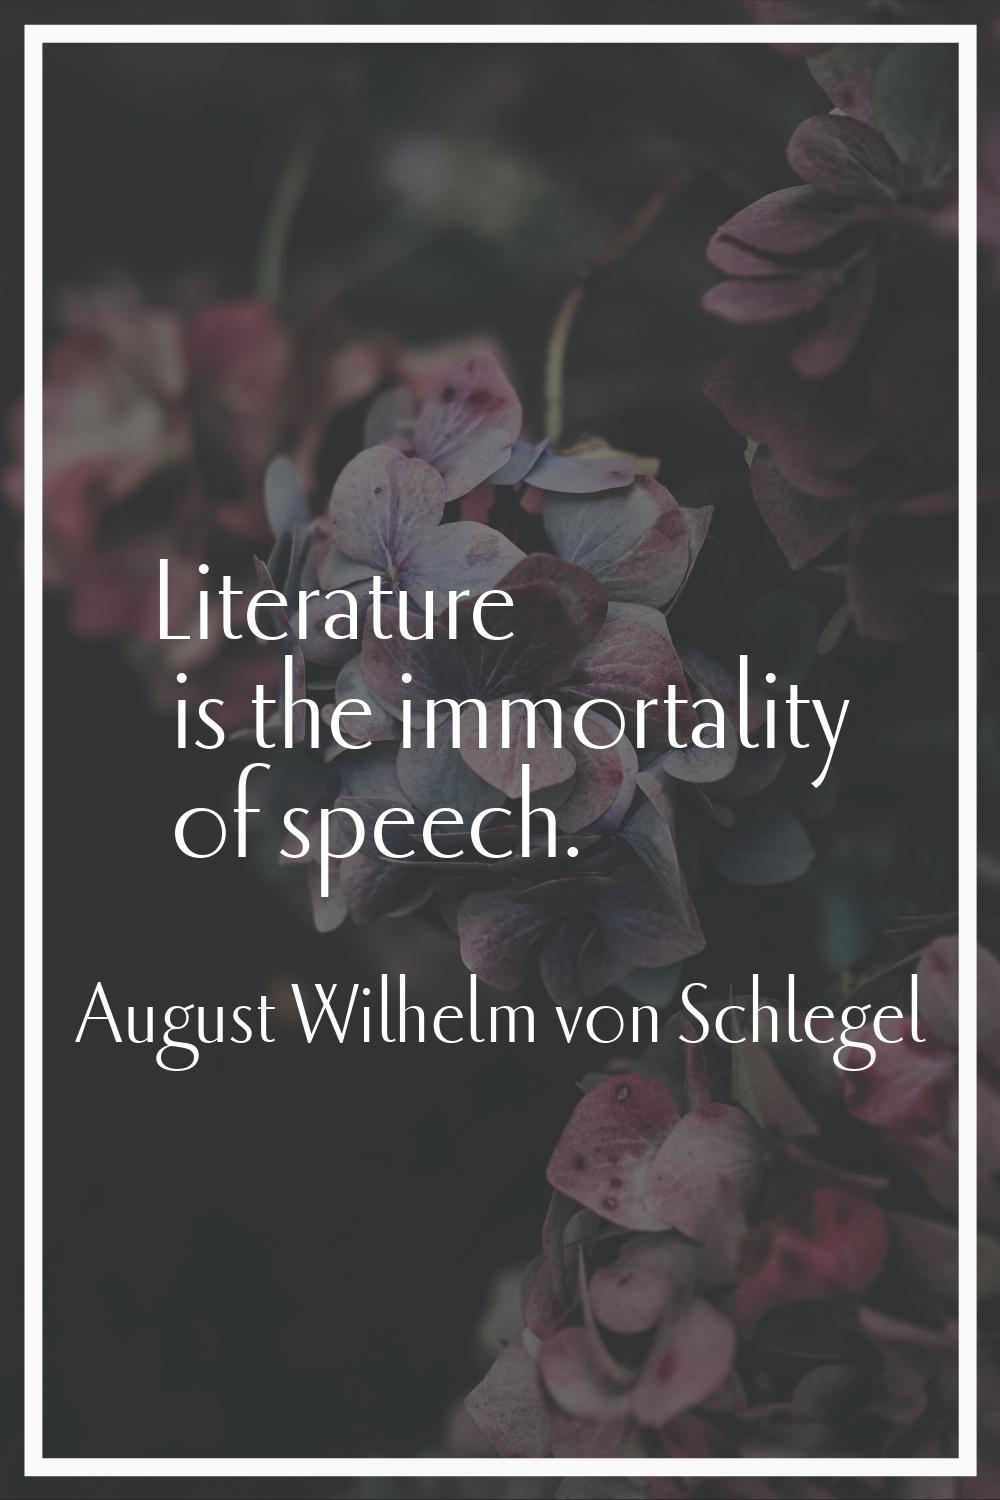 Literature is the immortality of speech.